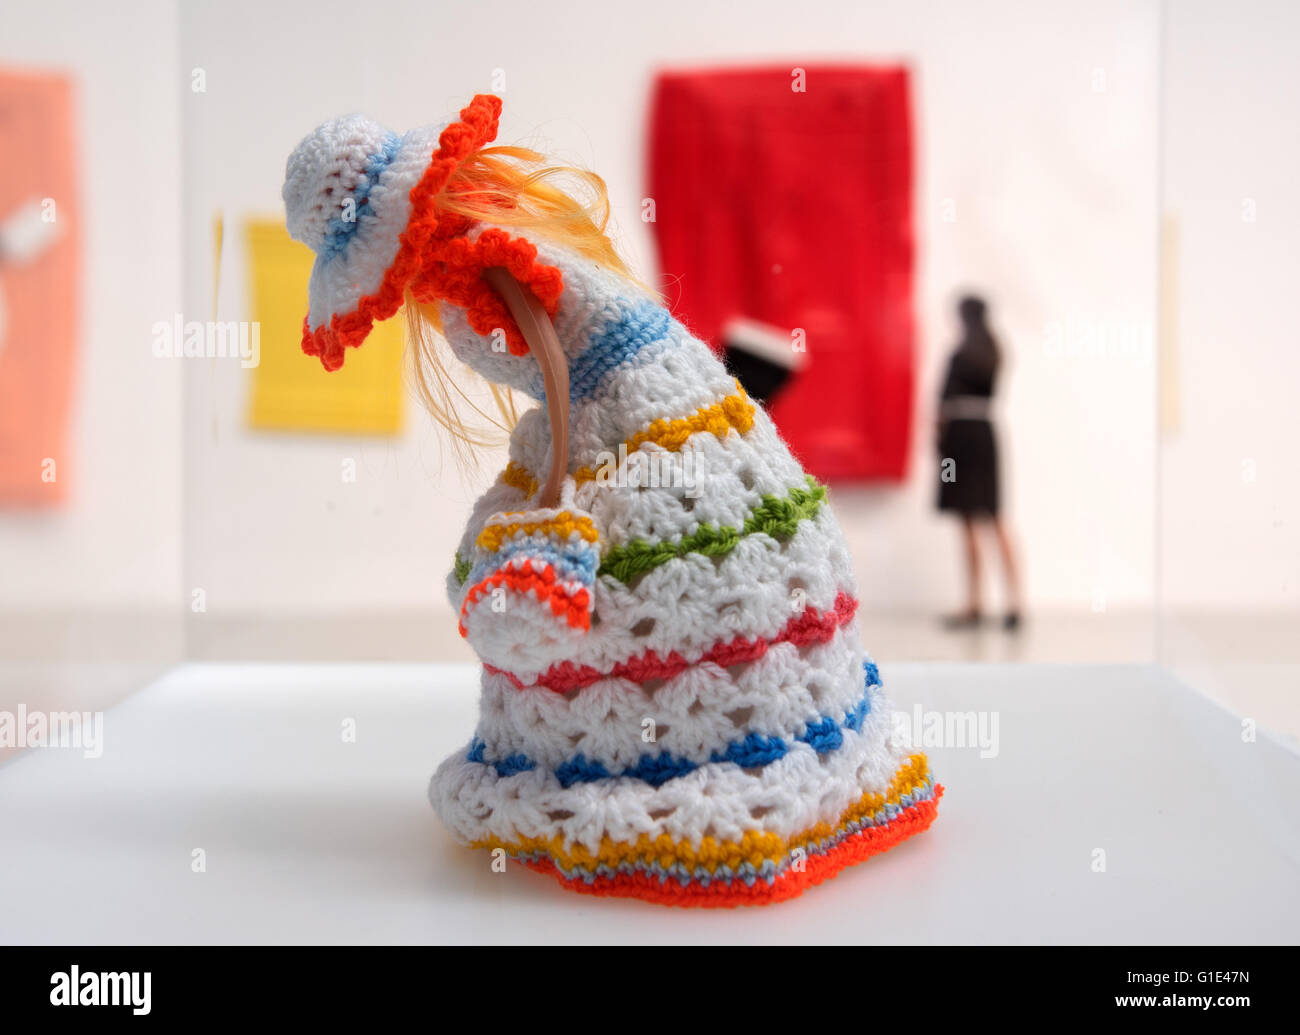 Hamburg, Germany. 13th May, 2016. A knitted toilet paper cover shaped like a doll is seen at an exhibition by artist Andreas Slominski at the Deichtorhallen exhibition hall in Hamburg, Germany, 13 May 2016. Slominksi created an art installation made of more than hundred portable toilets. Photo: Daniel Bockwoldt/dpa/Alamy Live News Stock Photo